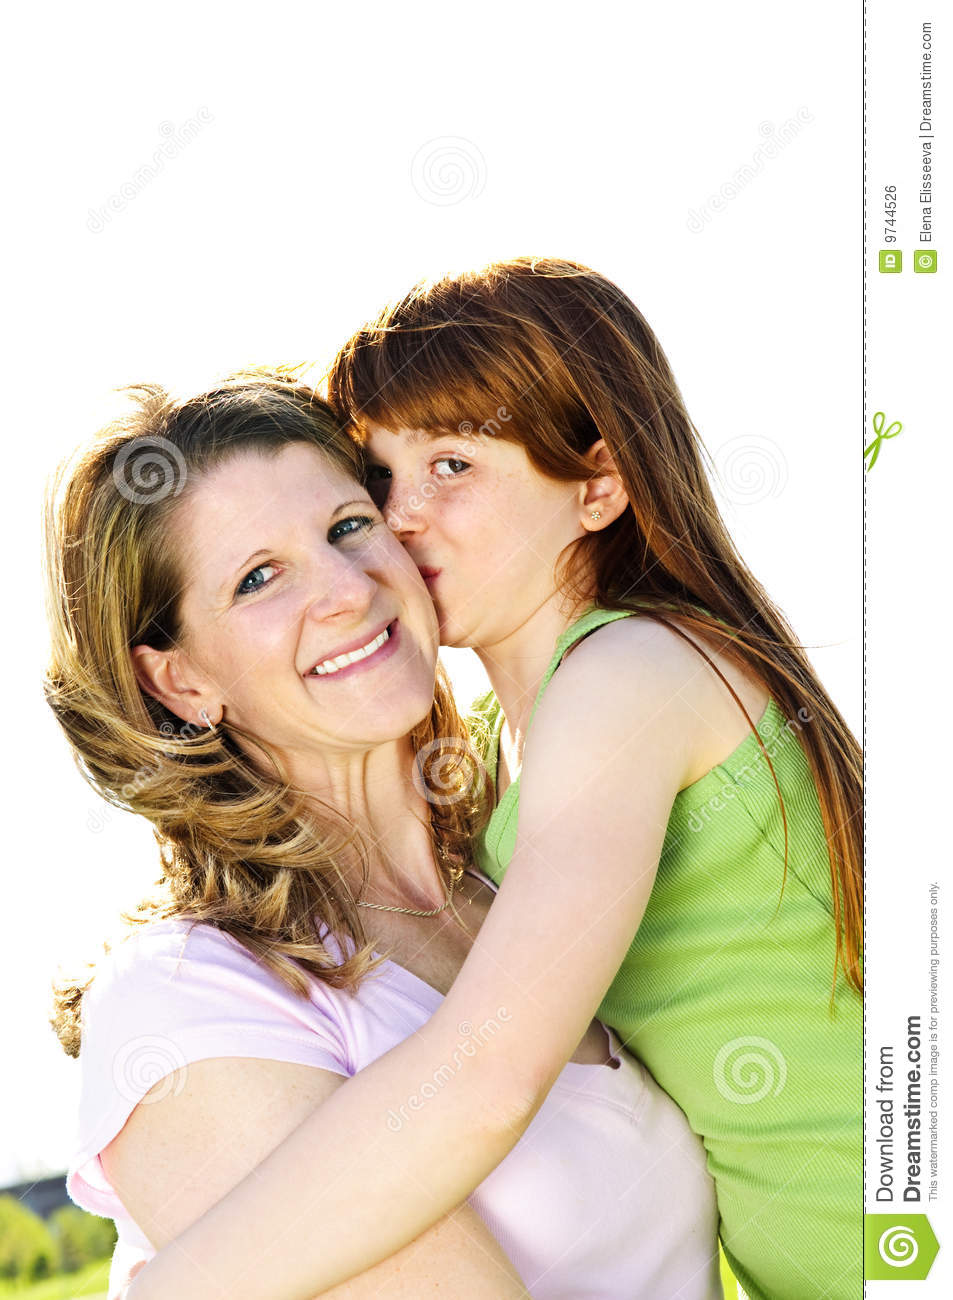 Mother And Daughter Hugging Royalty Free Stock Image   Image  9744526